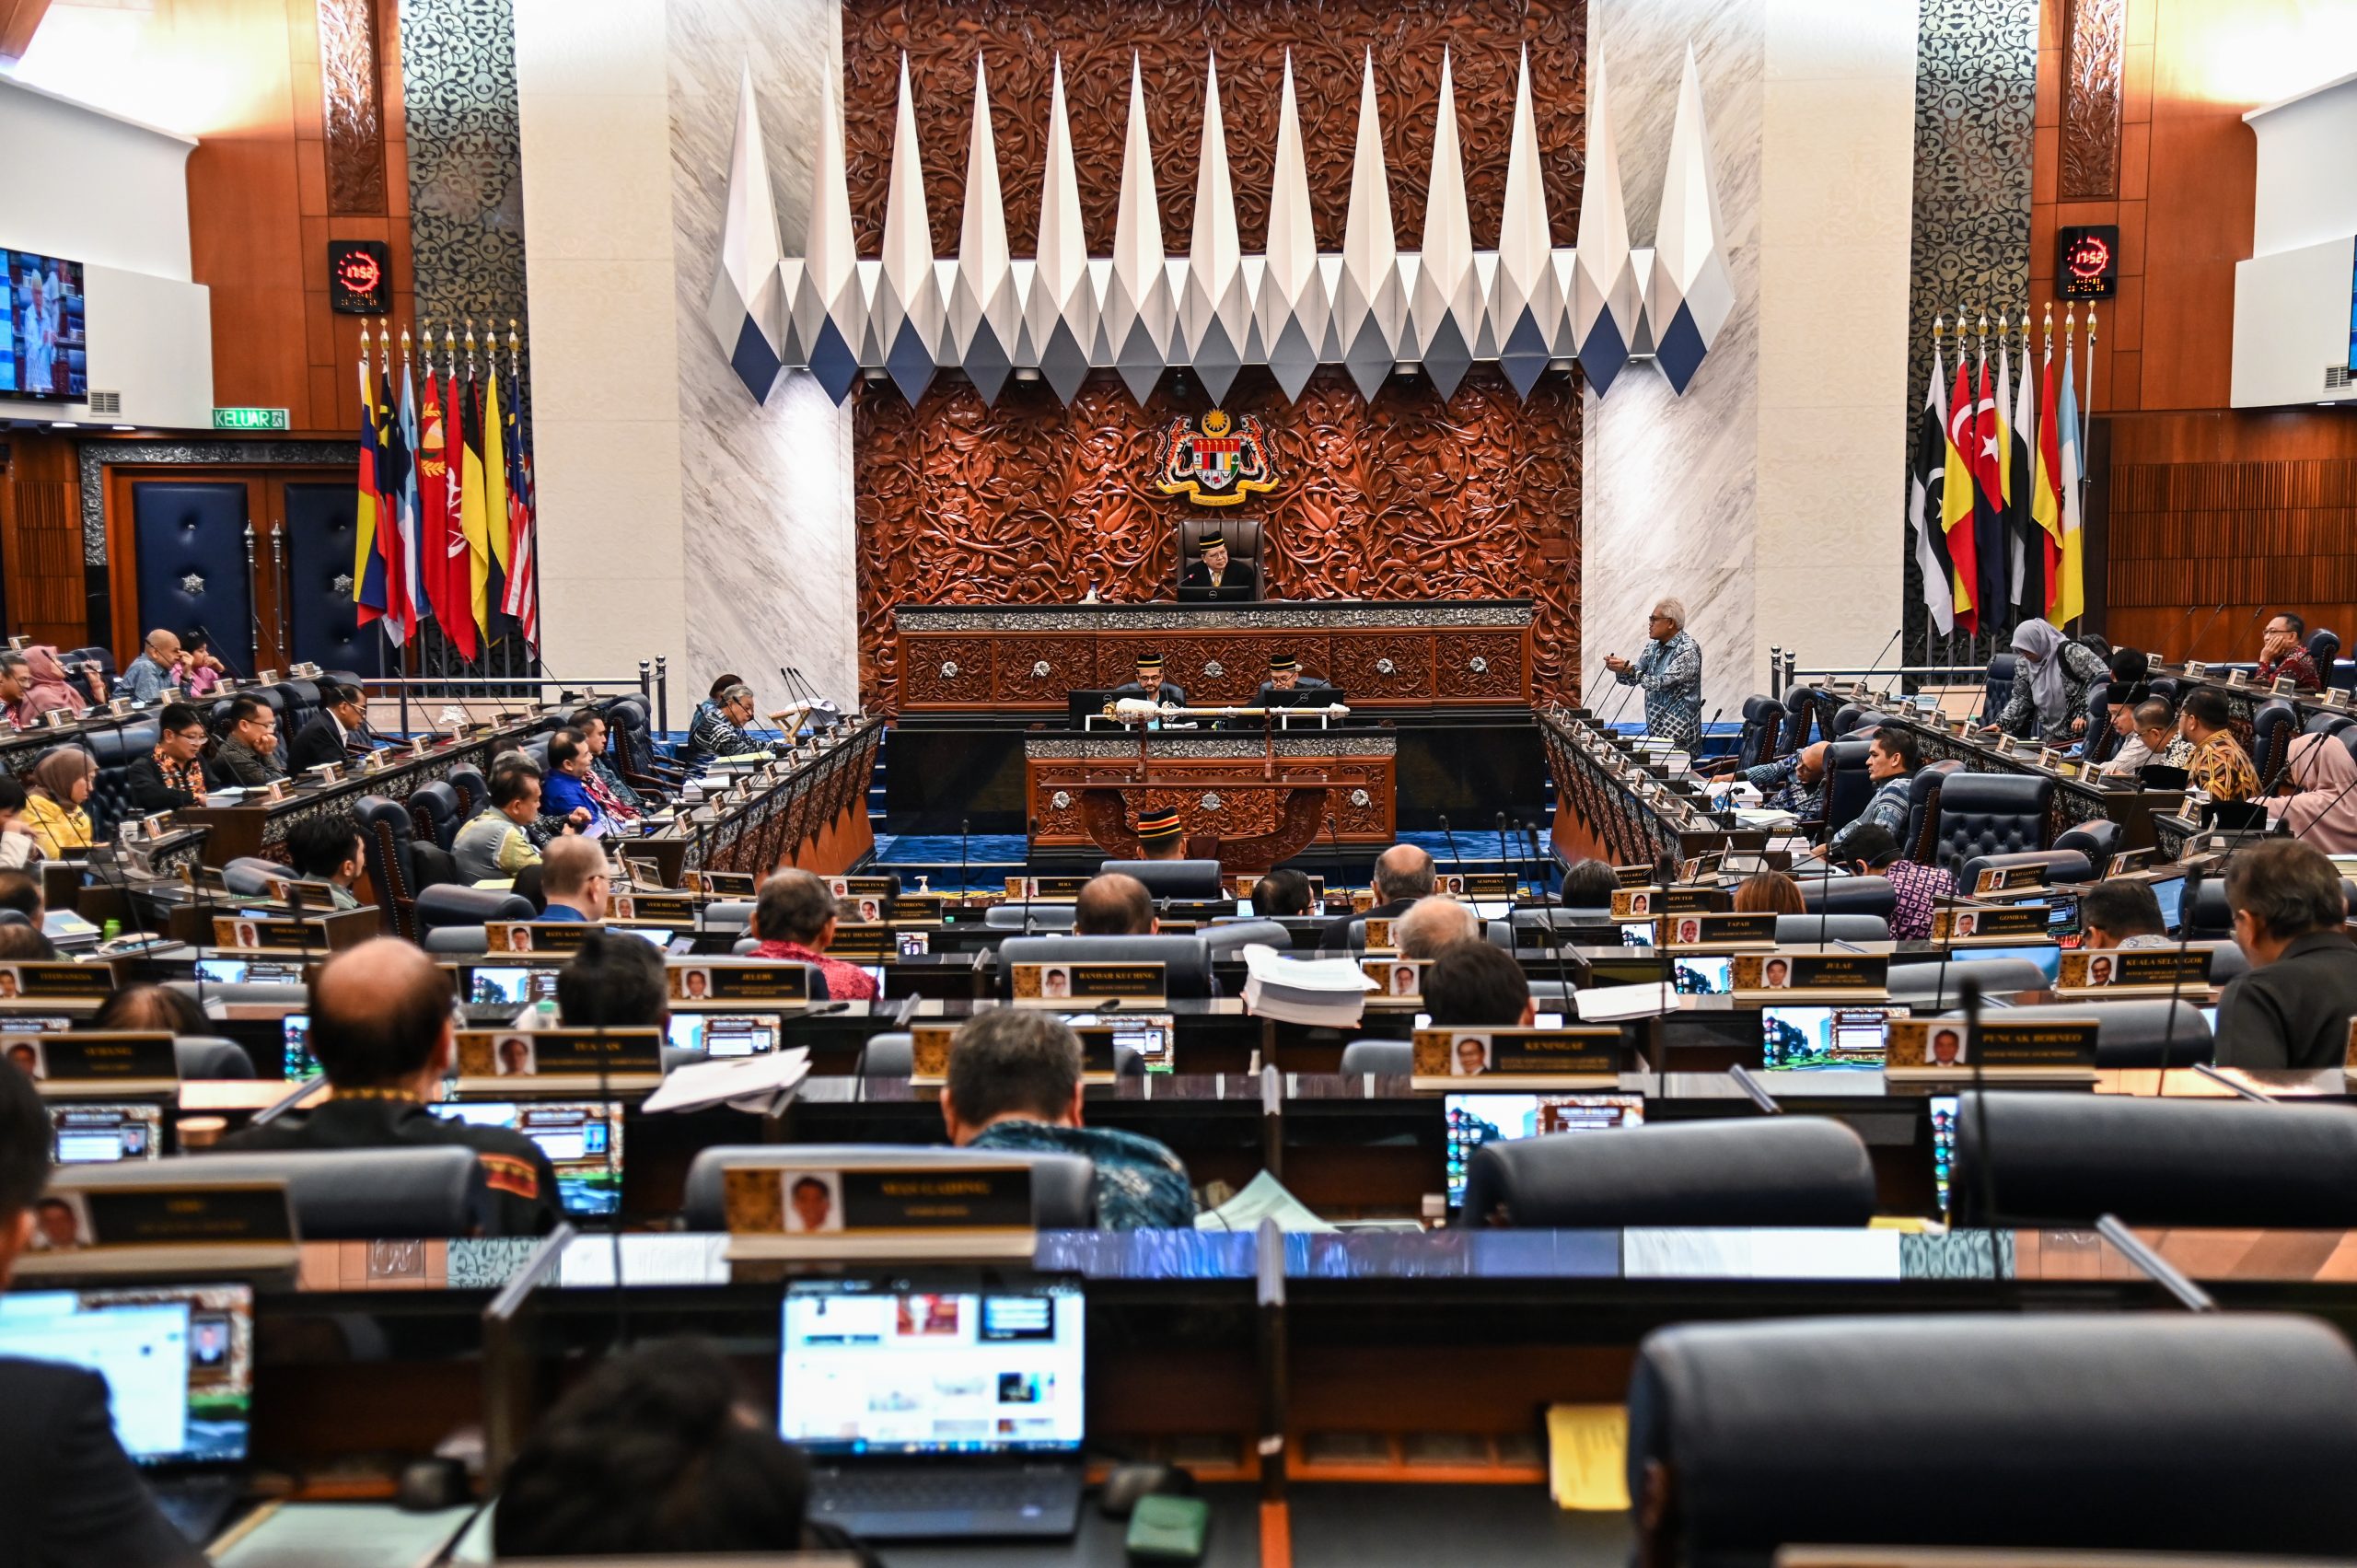 Media freedom, freedom of speech among focus in Parliament today